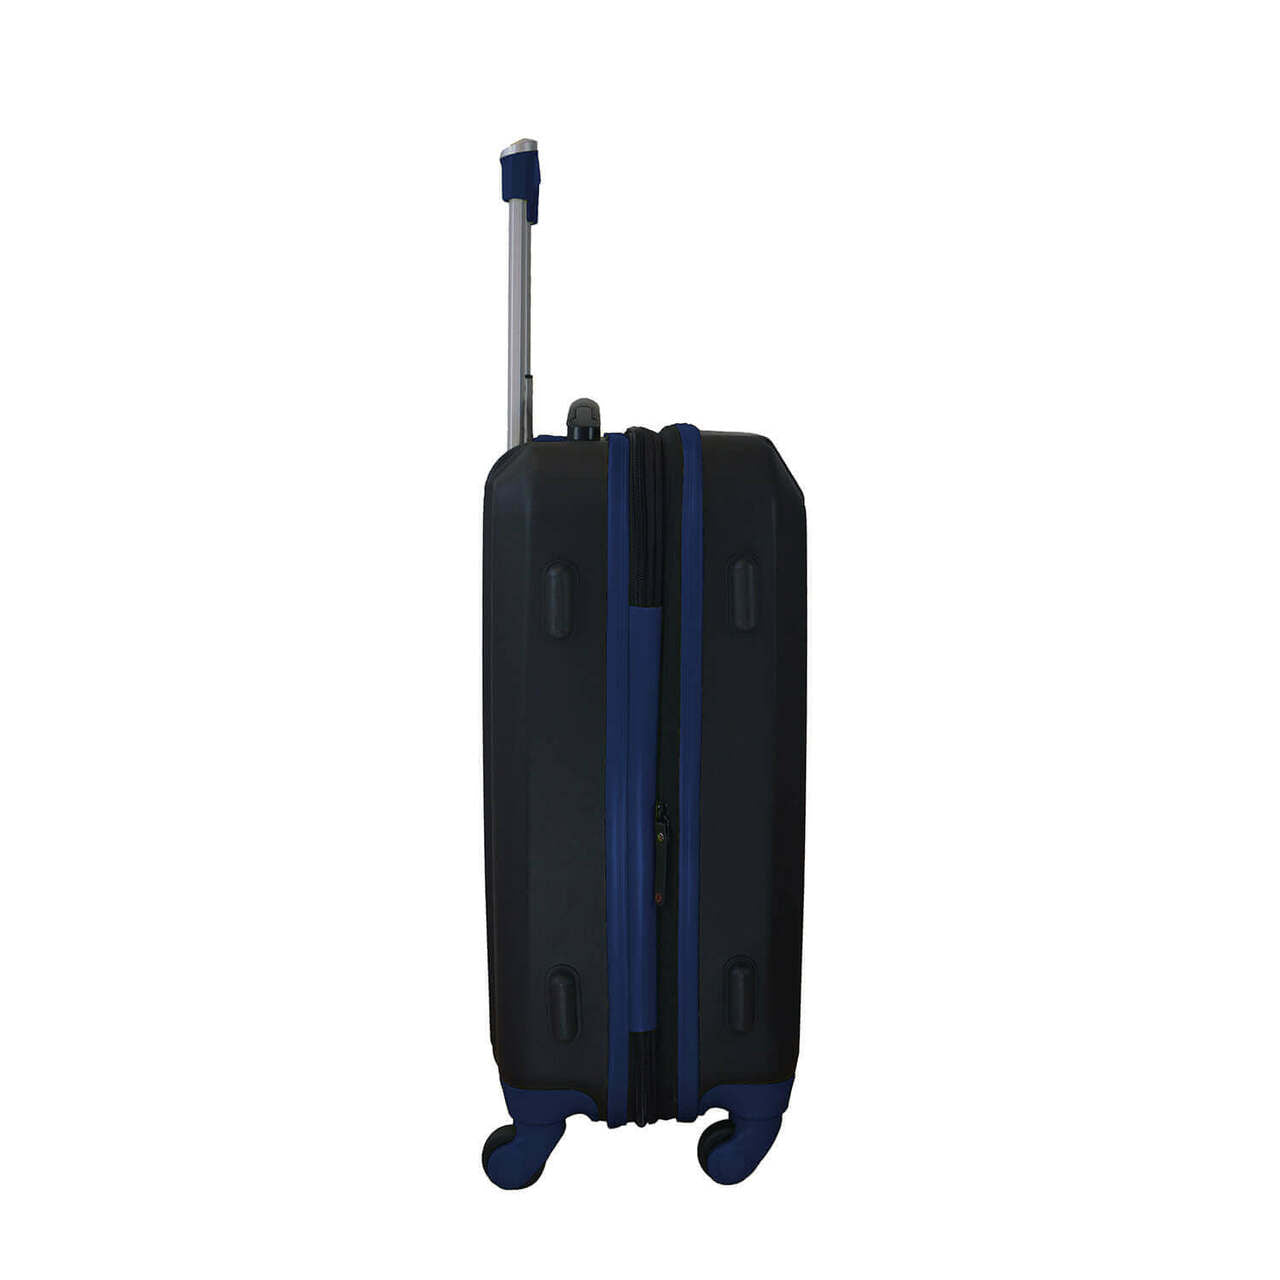 Seahawks Carry On Spinner Luggage | Seattle Seahawks Hardcase Two-Tone Luggage Carry-on Spinner in Navy